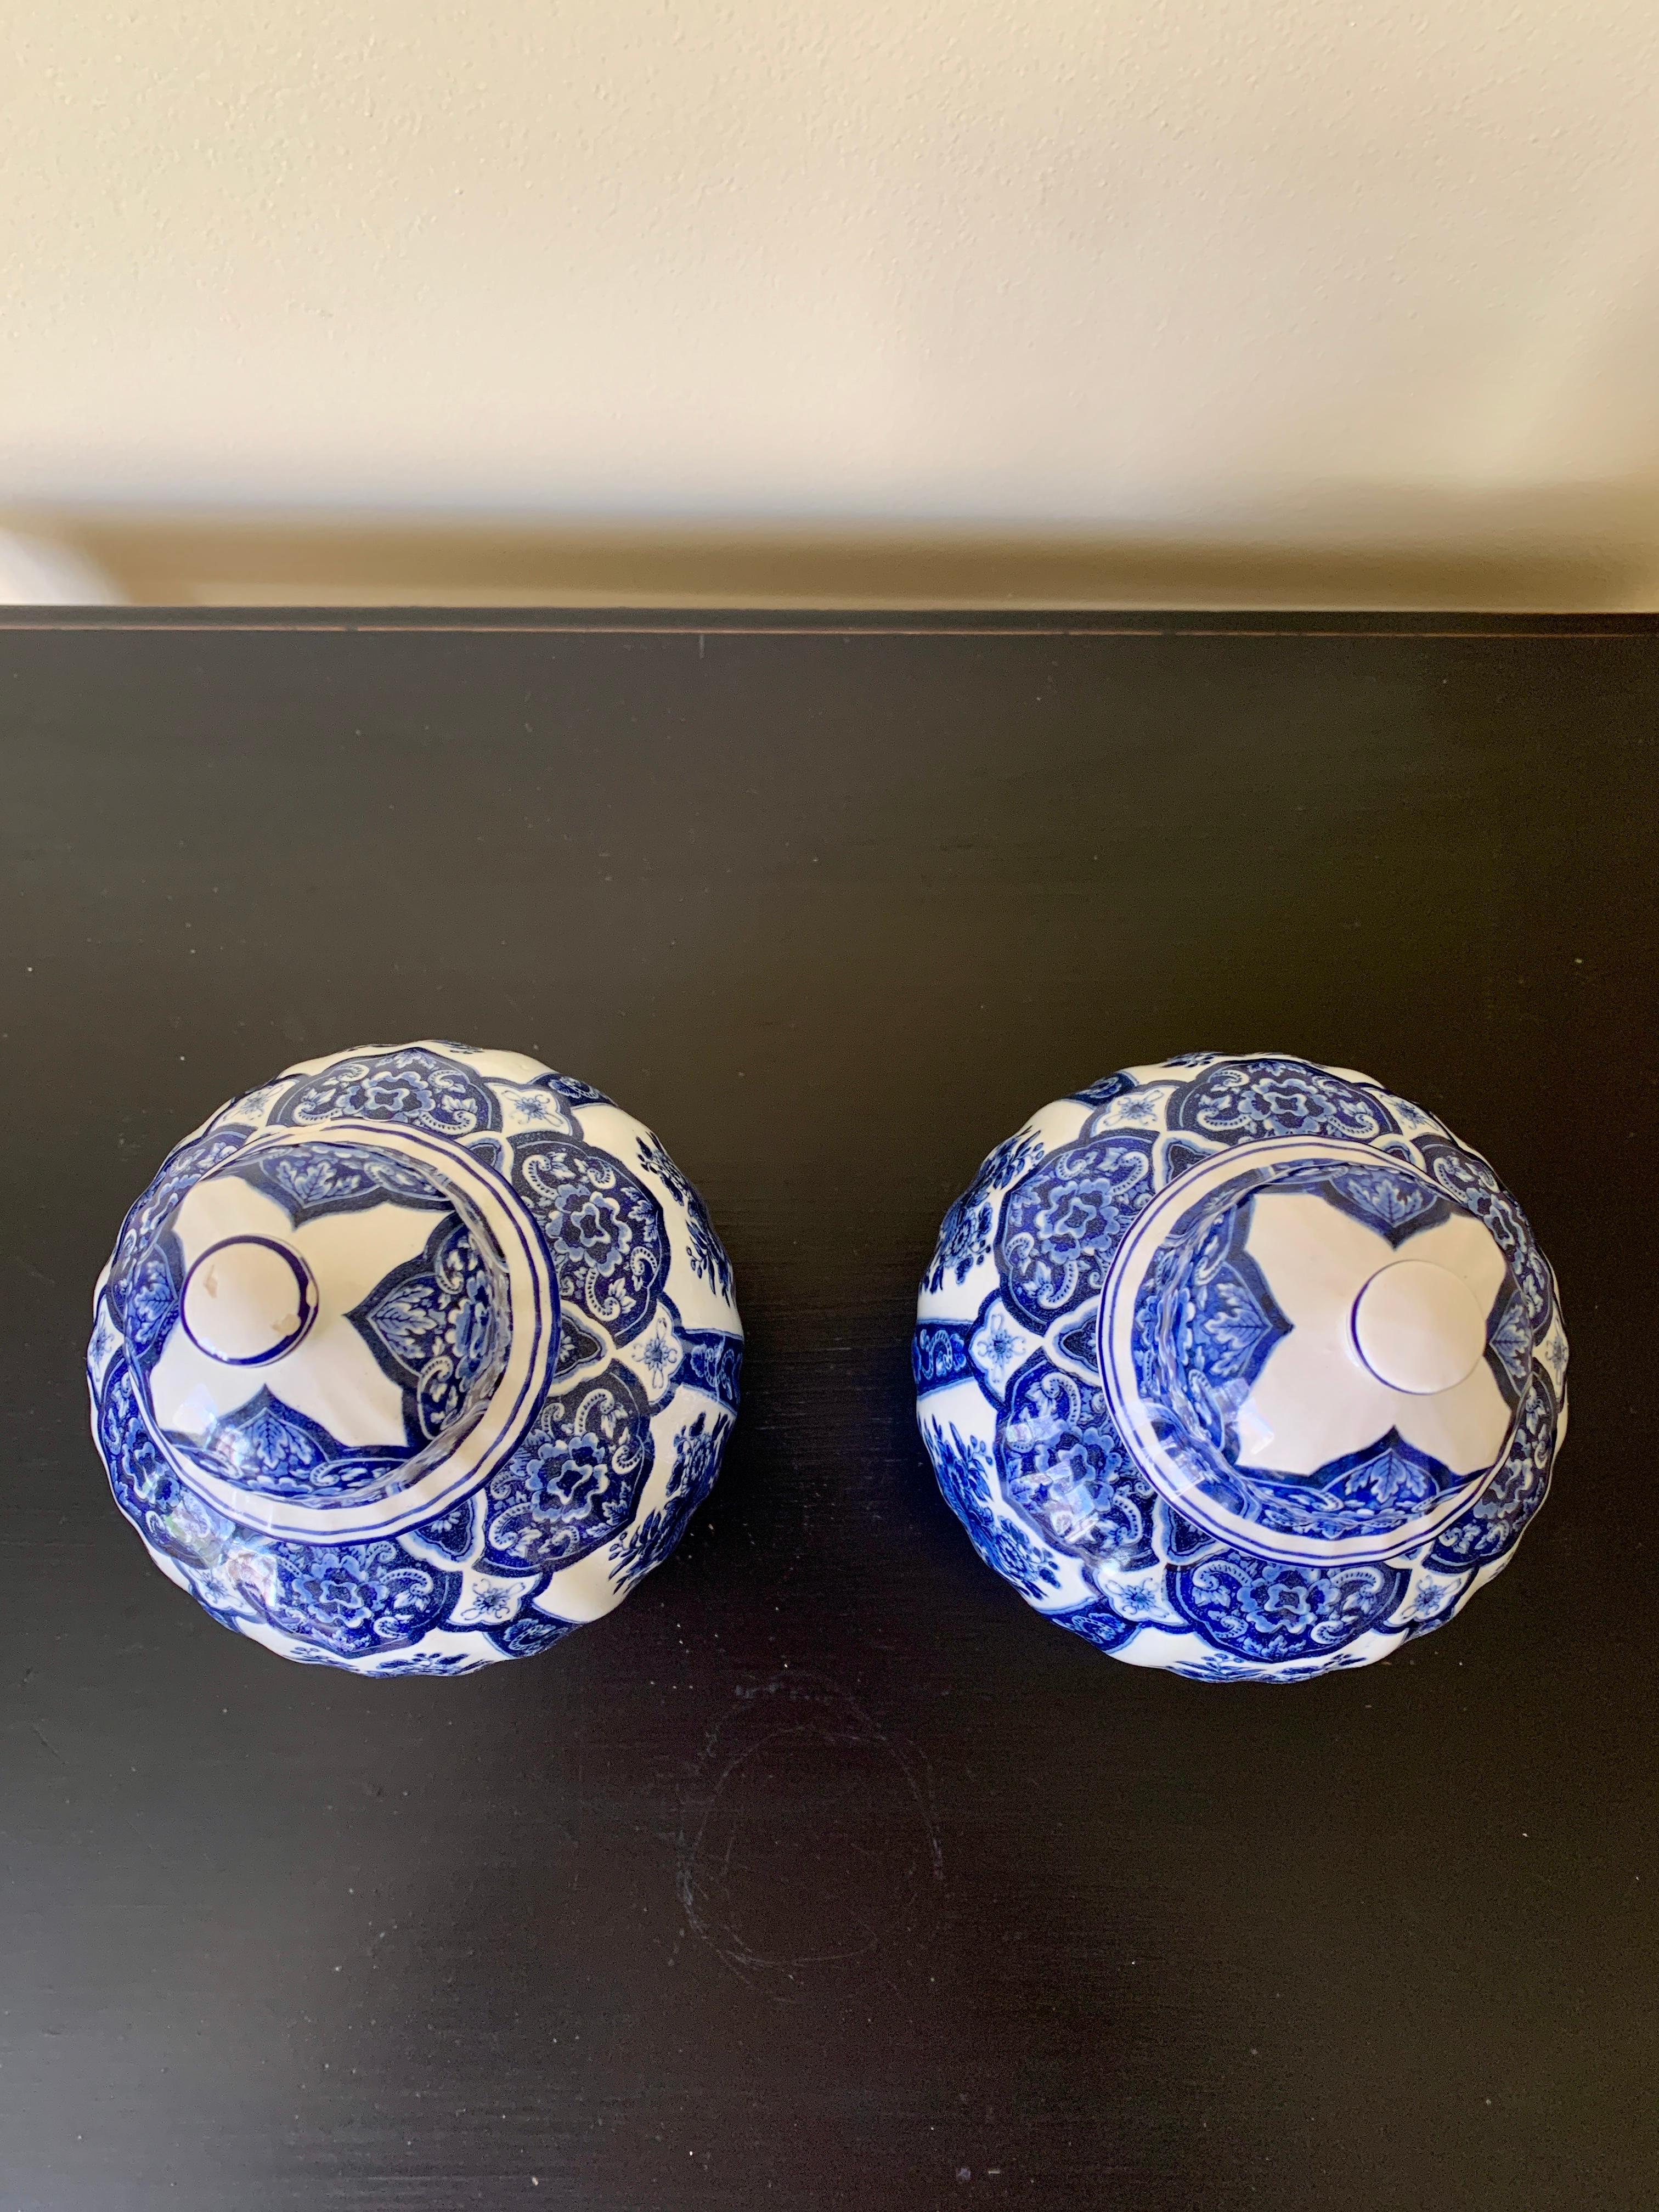 20th Century Italian Blue and White Porcelain Ginger Jars by Ardalt Blue Delfia, Pair For Sale